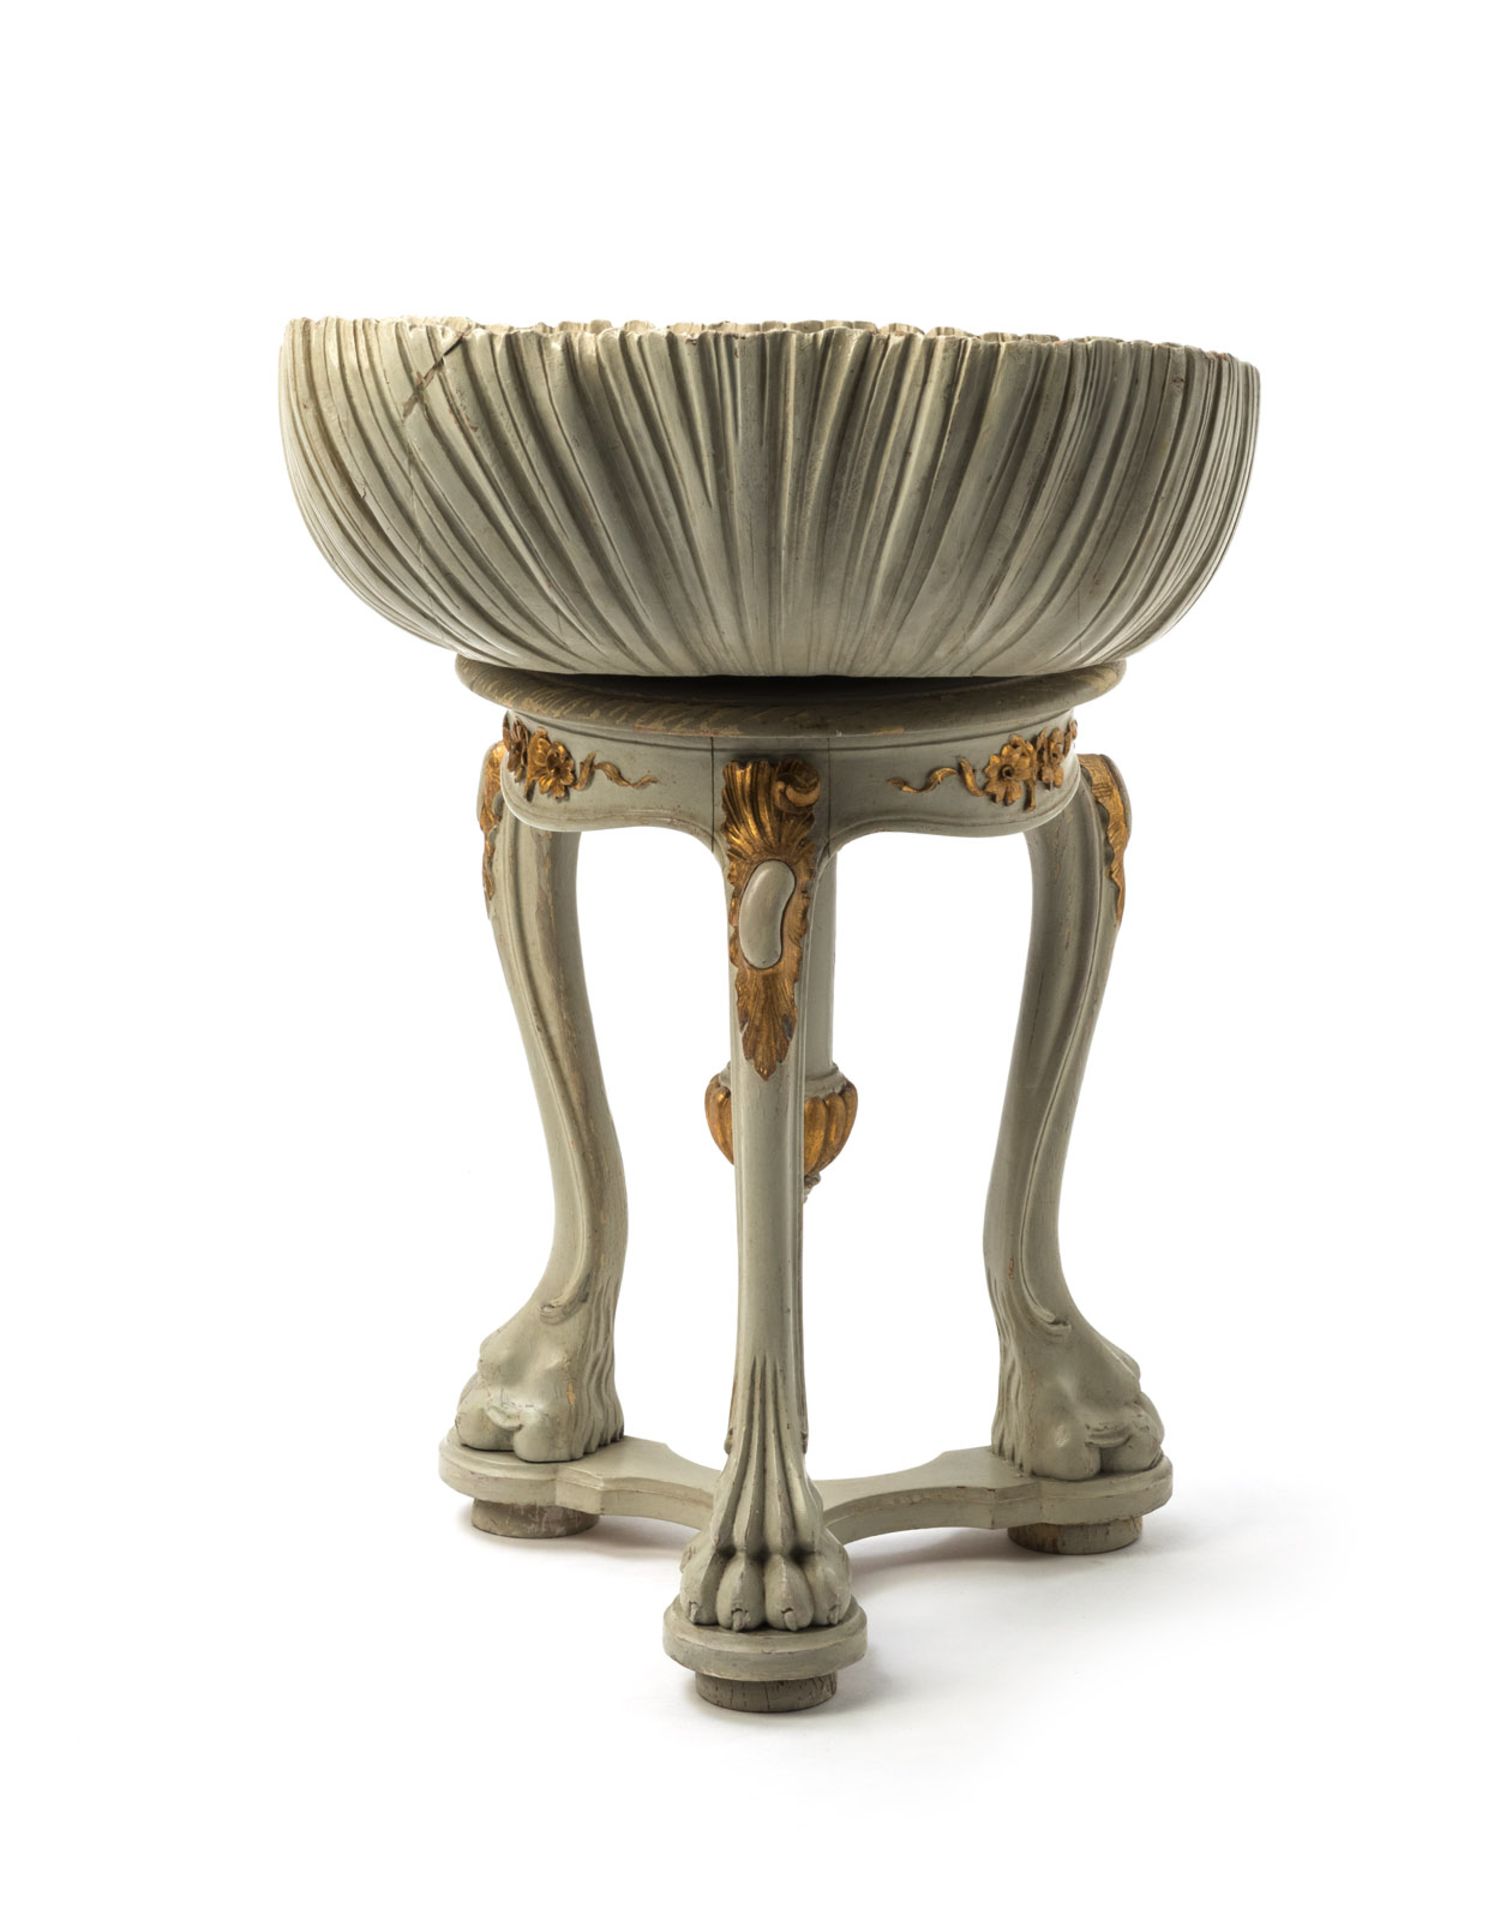 A BAROQUE STYLE PIANO STOOL WITH SHELL SHAPED SEAT - Image 3 of 4